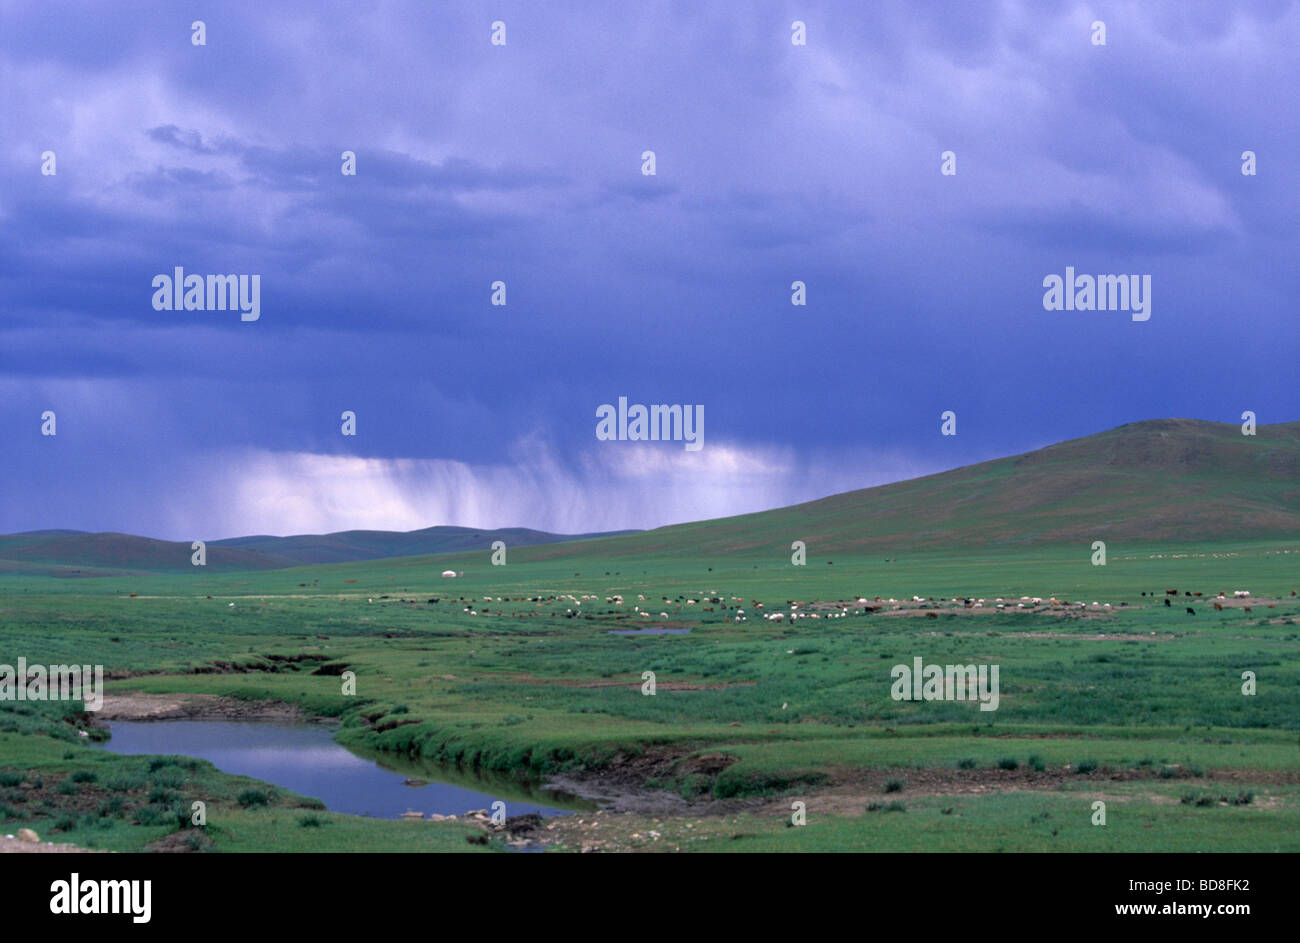 Storm over the steppe, Mongolia Stock Photo